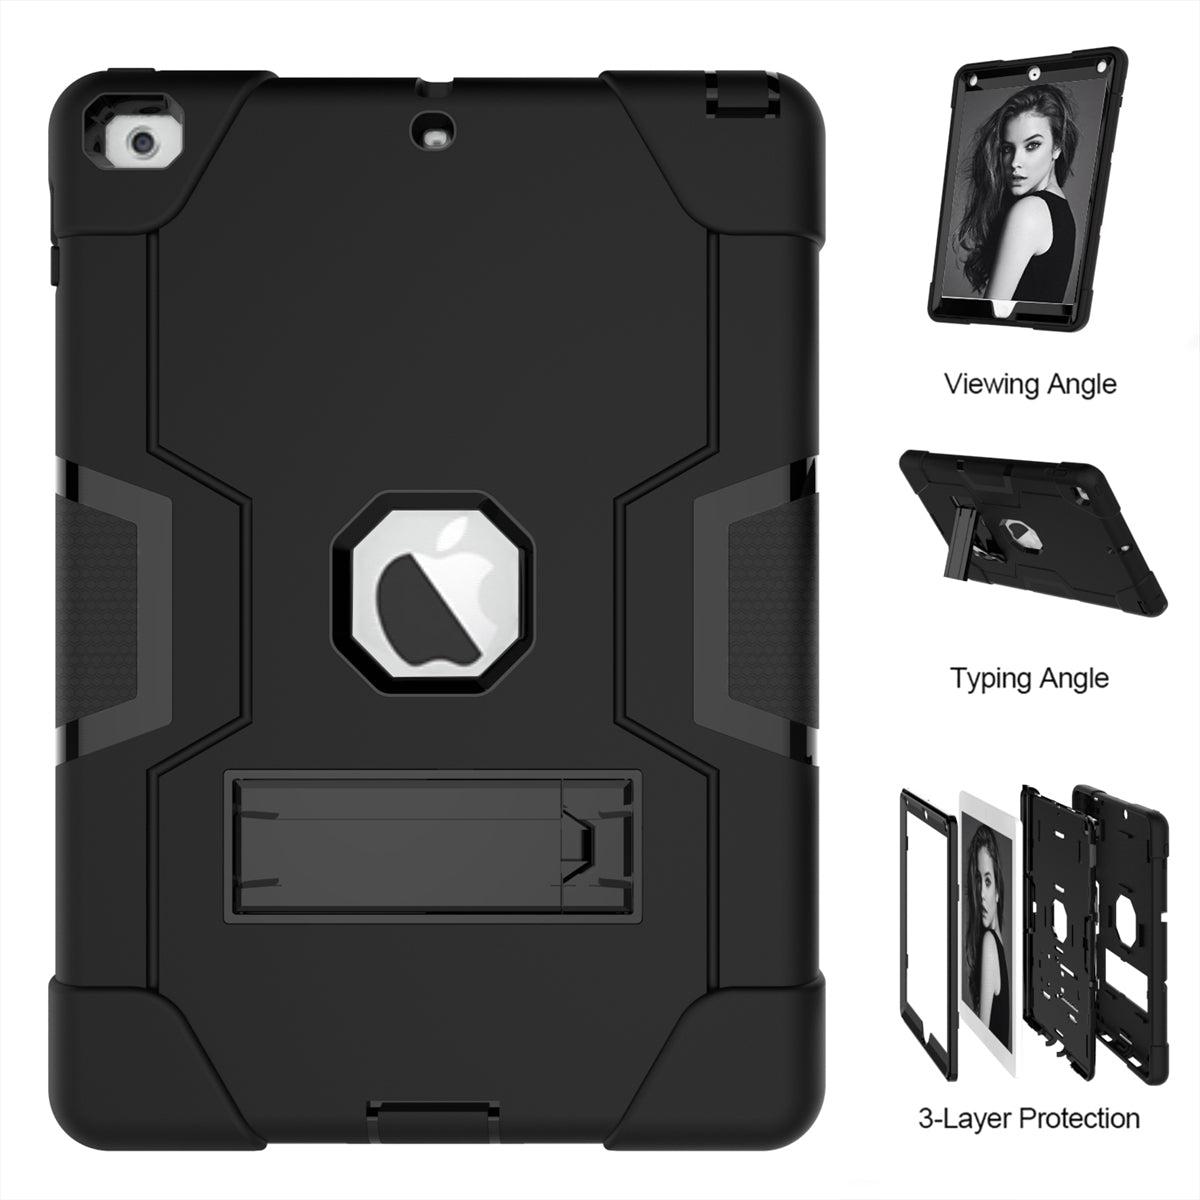 For Apple iPad Air4 10.9" / Pro 11" (2021) Hard Case Survivor with Stand - Black-Apple iPad Cases & Covers-First Help Tech